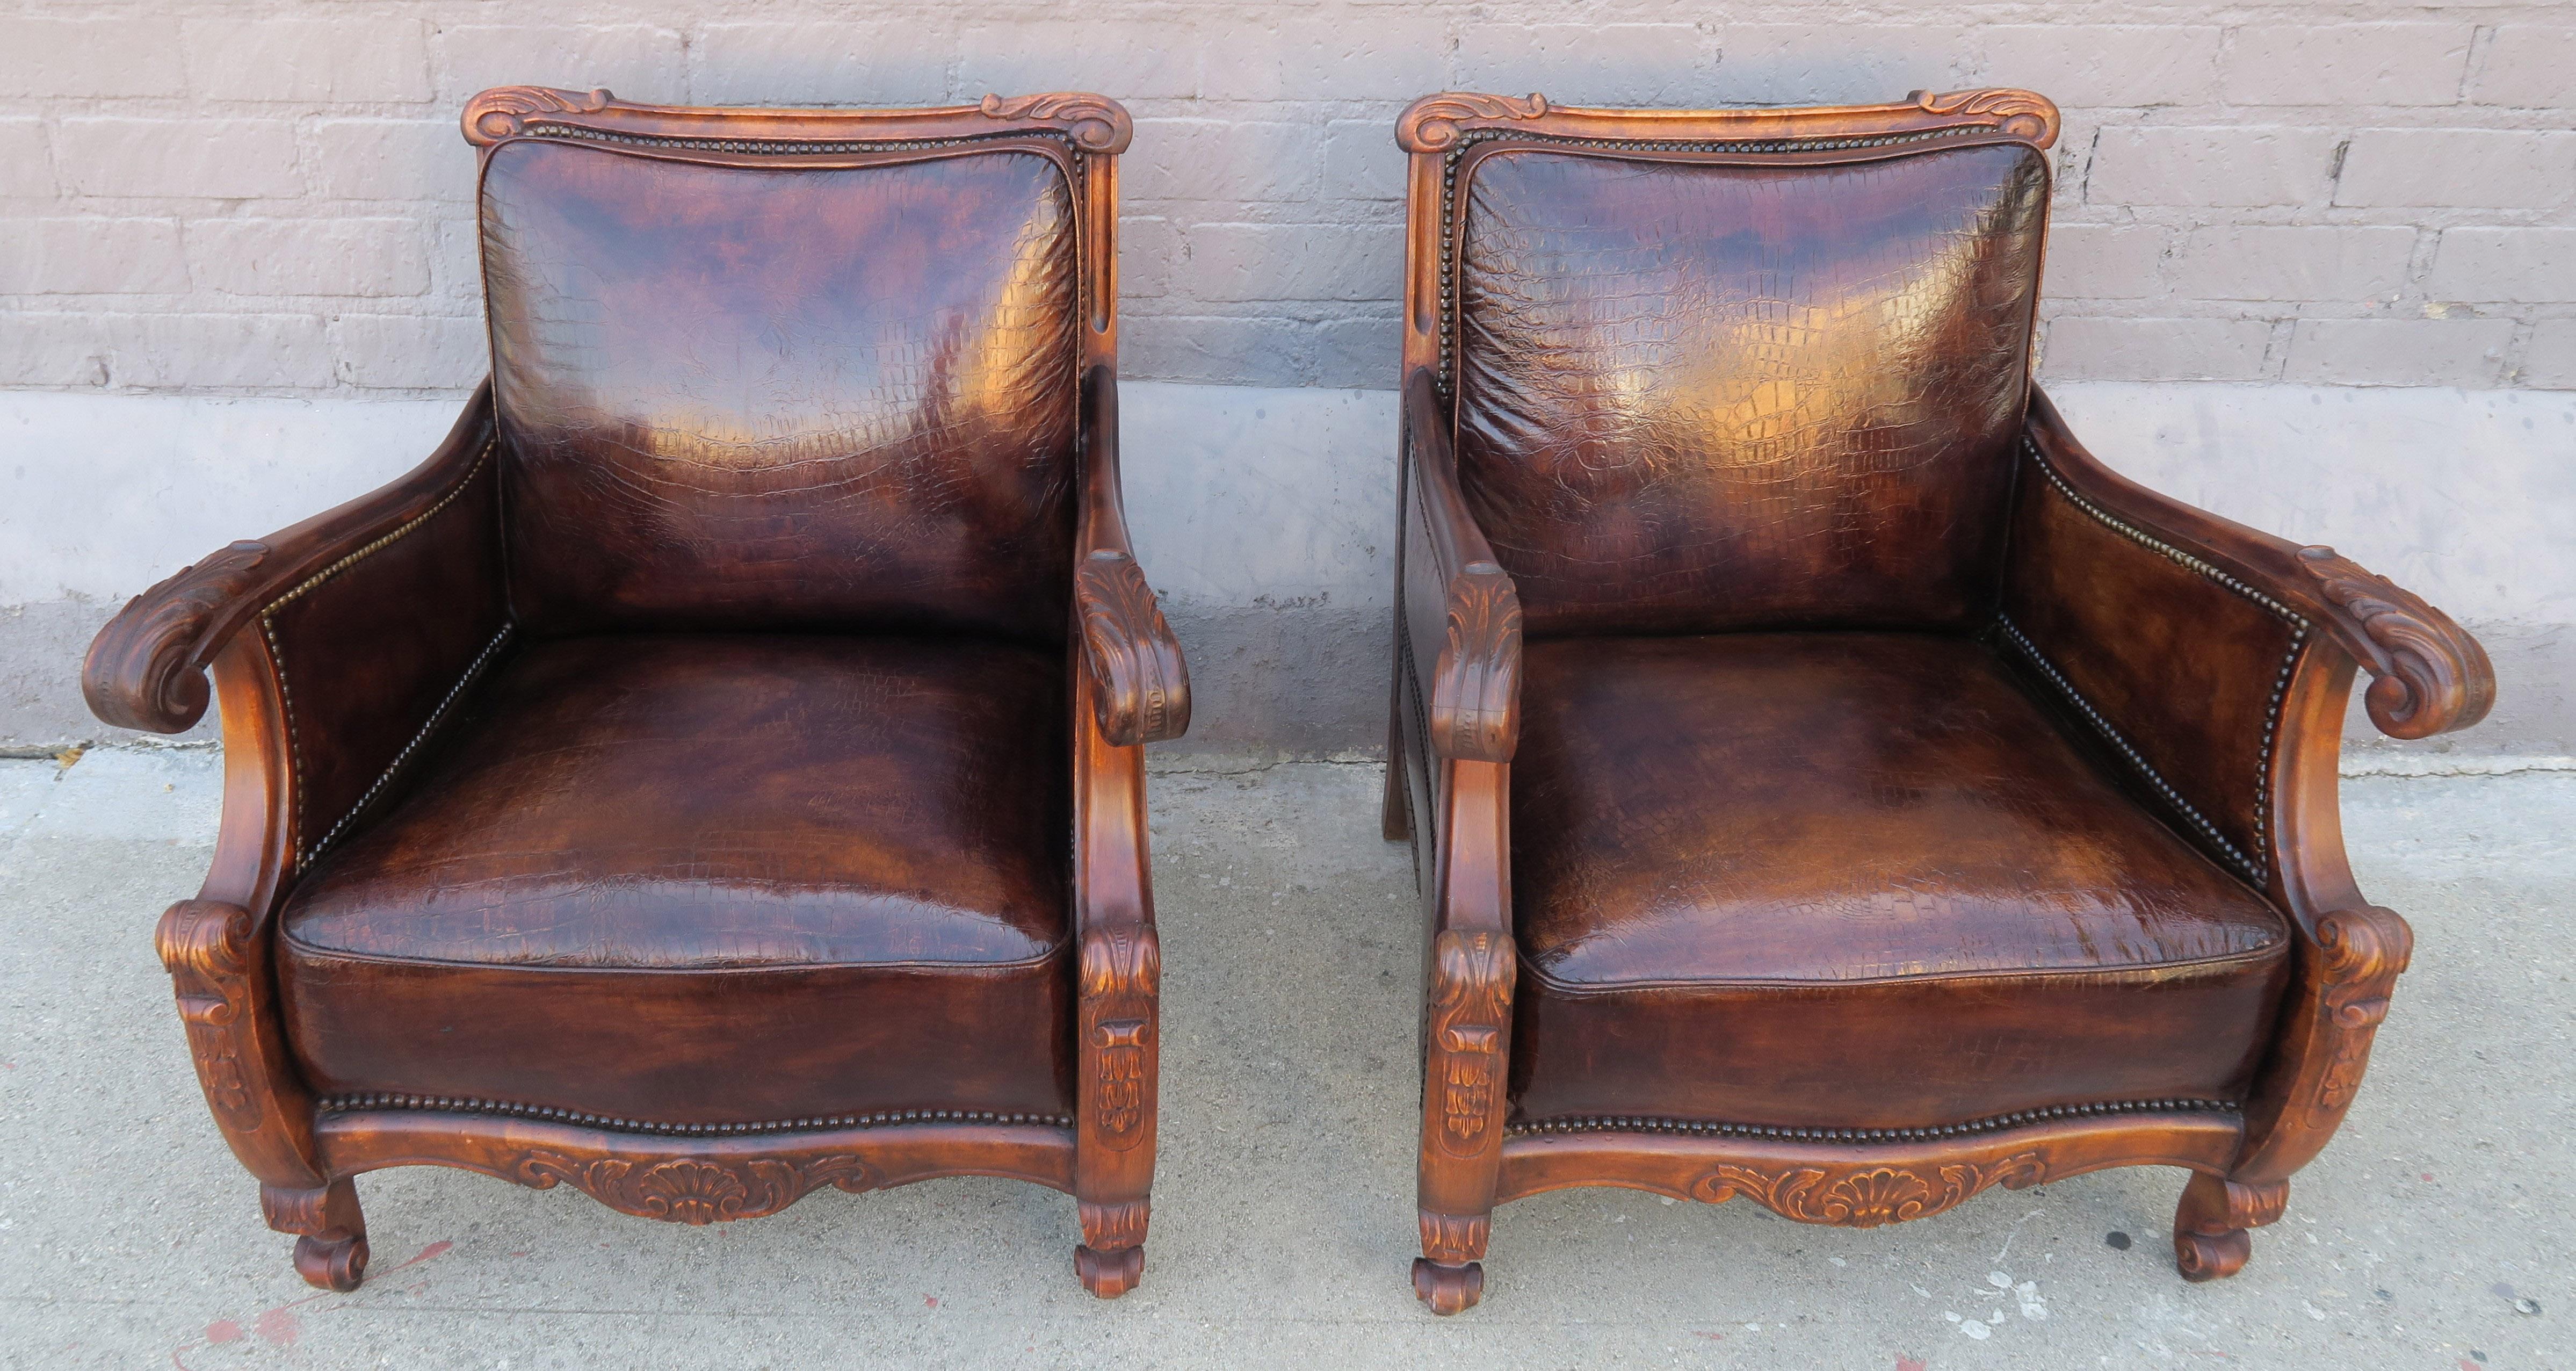 Pair of unique French embossed leather armchairs with a soft crocodile pattern in the antiqued brown leather. The pair of walnut armchairs are detailed with antique brass colored nail heads. The two front cabriole legs have a rams head foot. The two